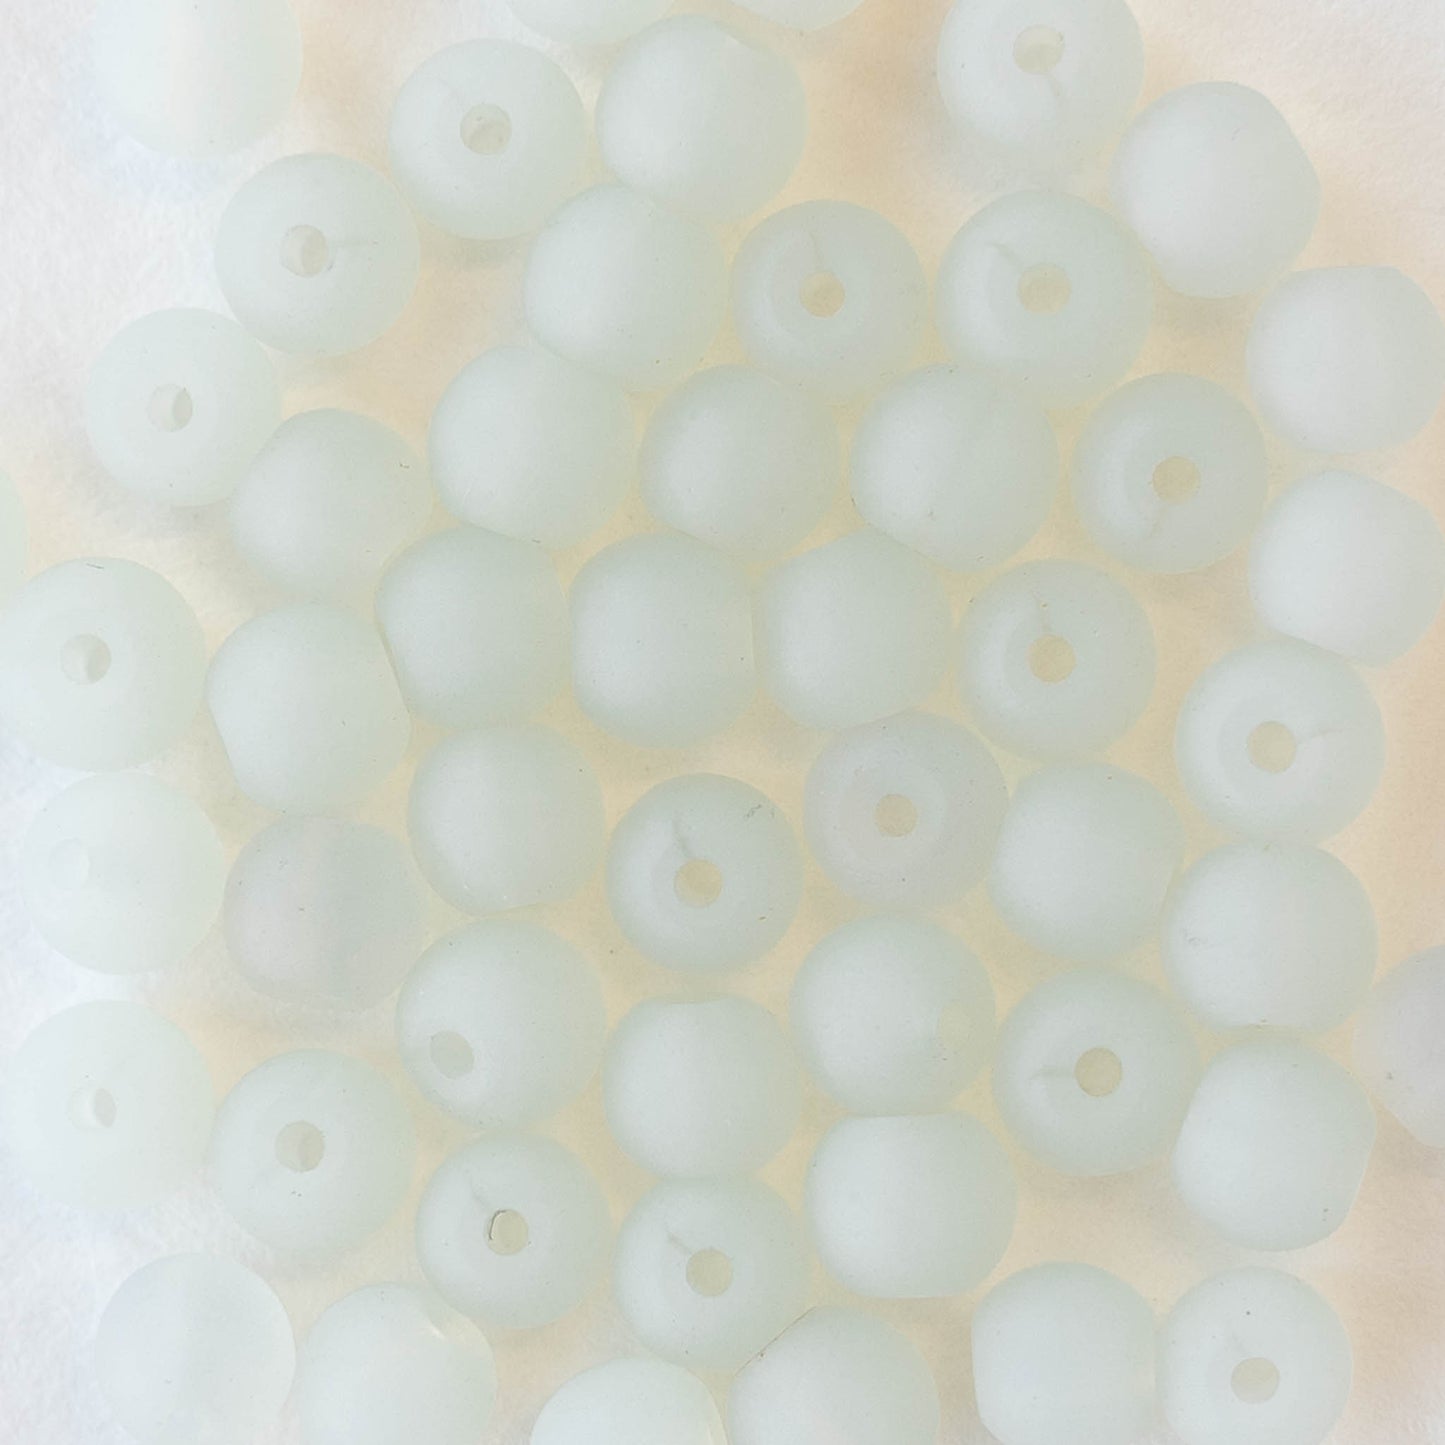 5mm Frosted Glass Rounds - Moonstone Opaline - 16 Inches